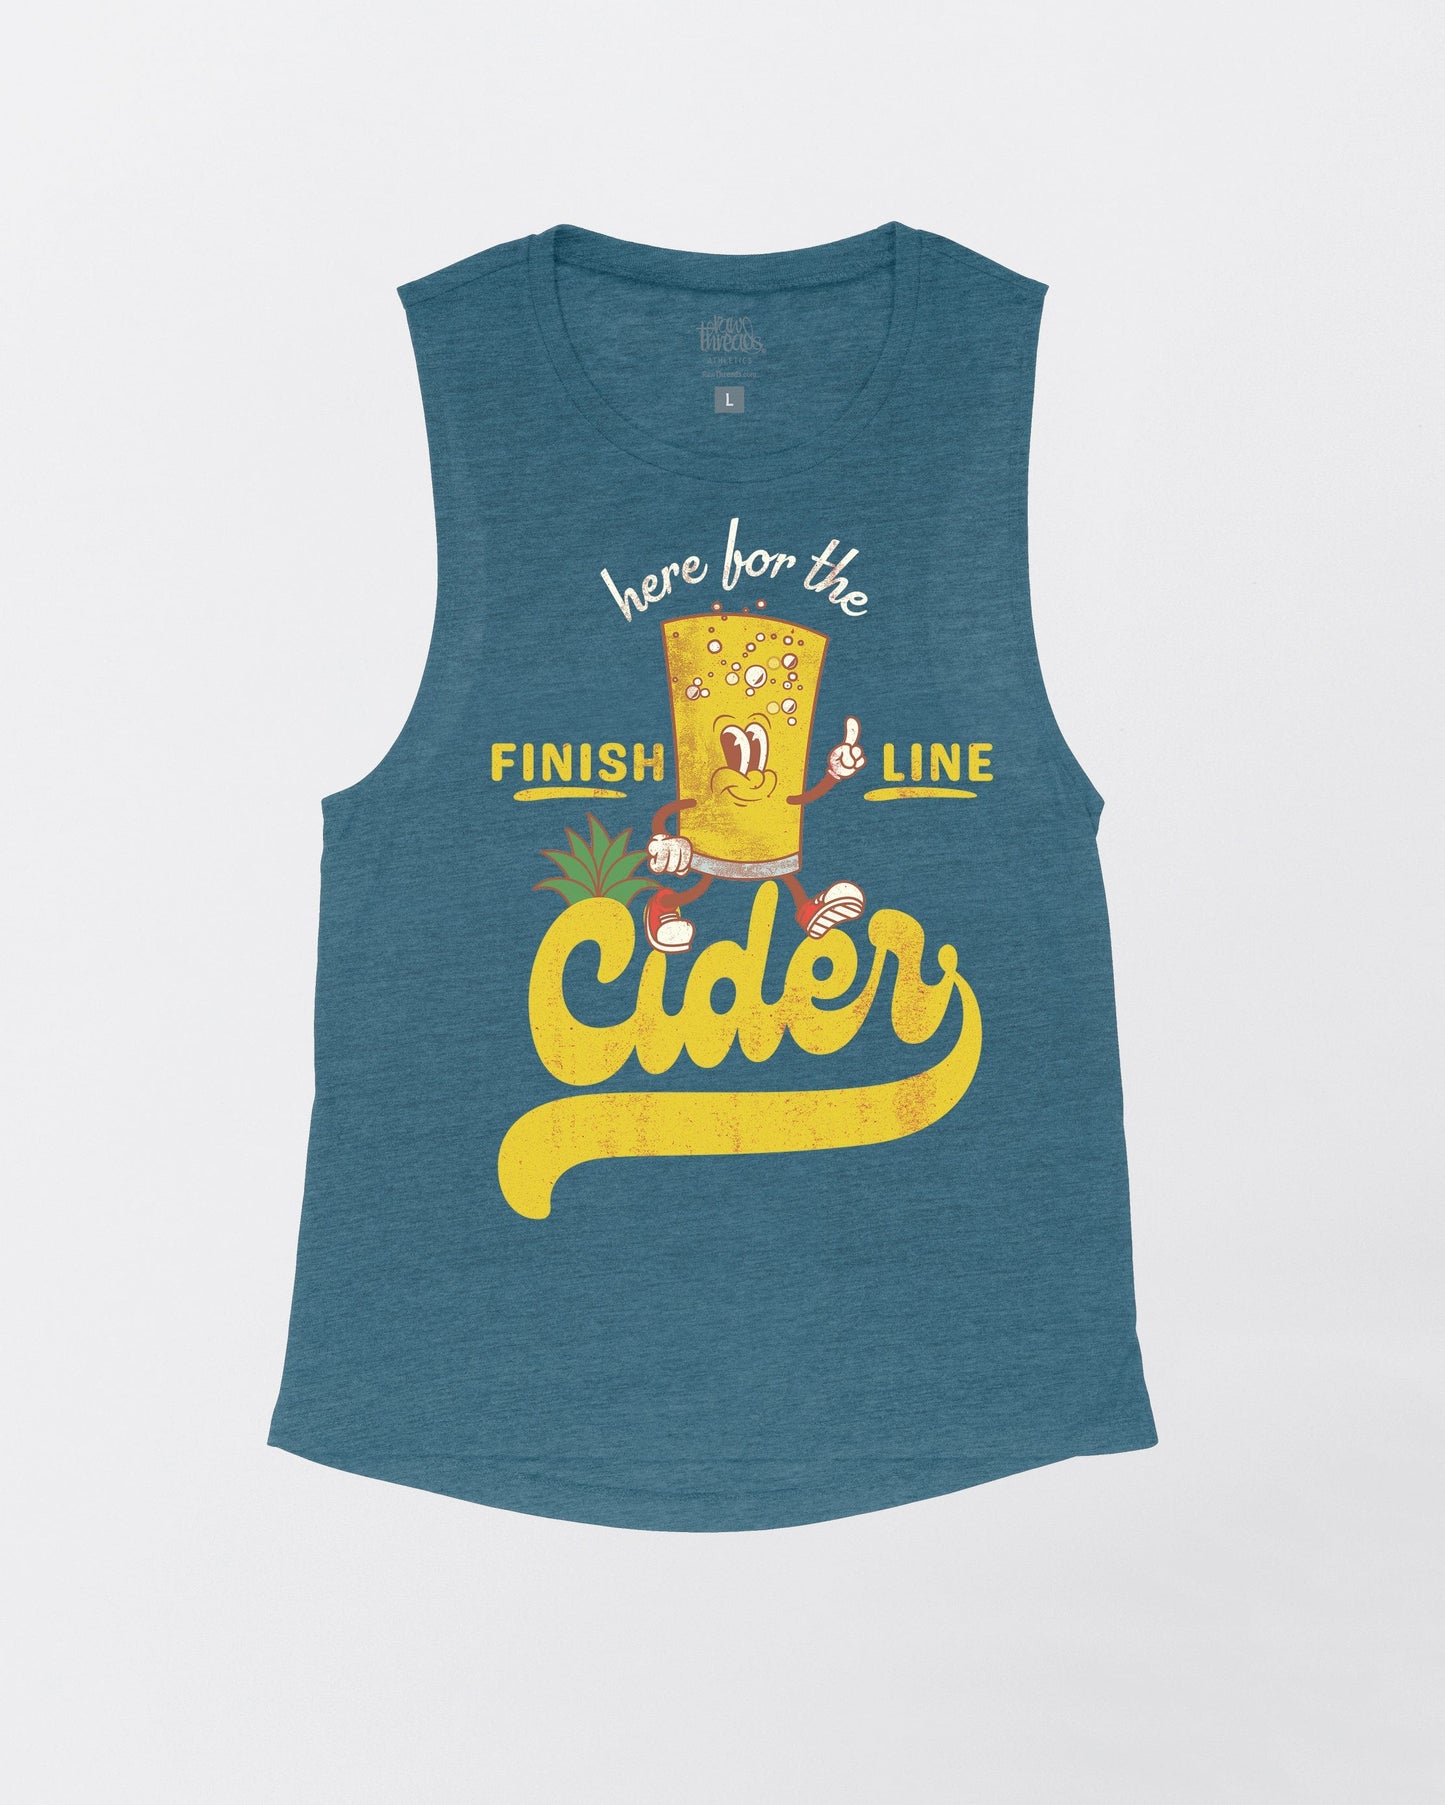 Here for the finish line CIDER